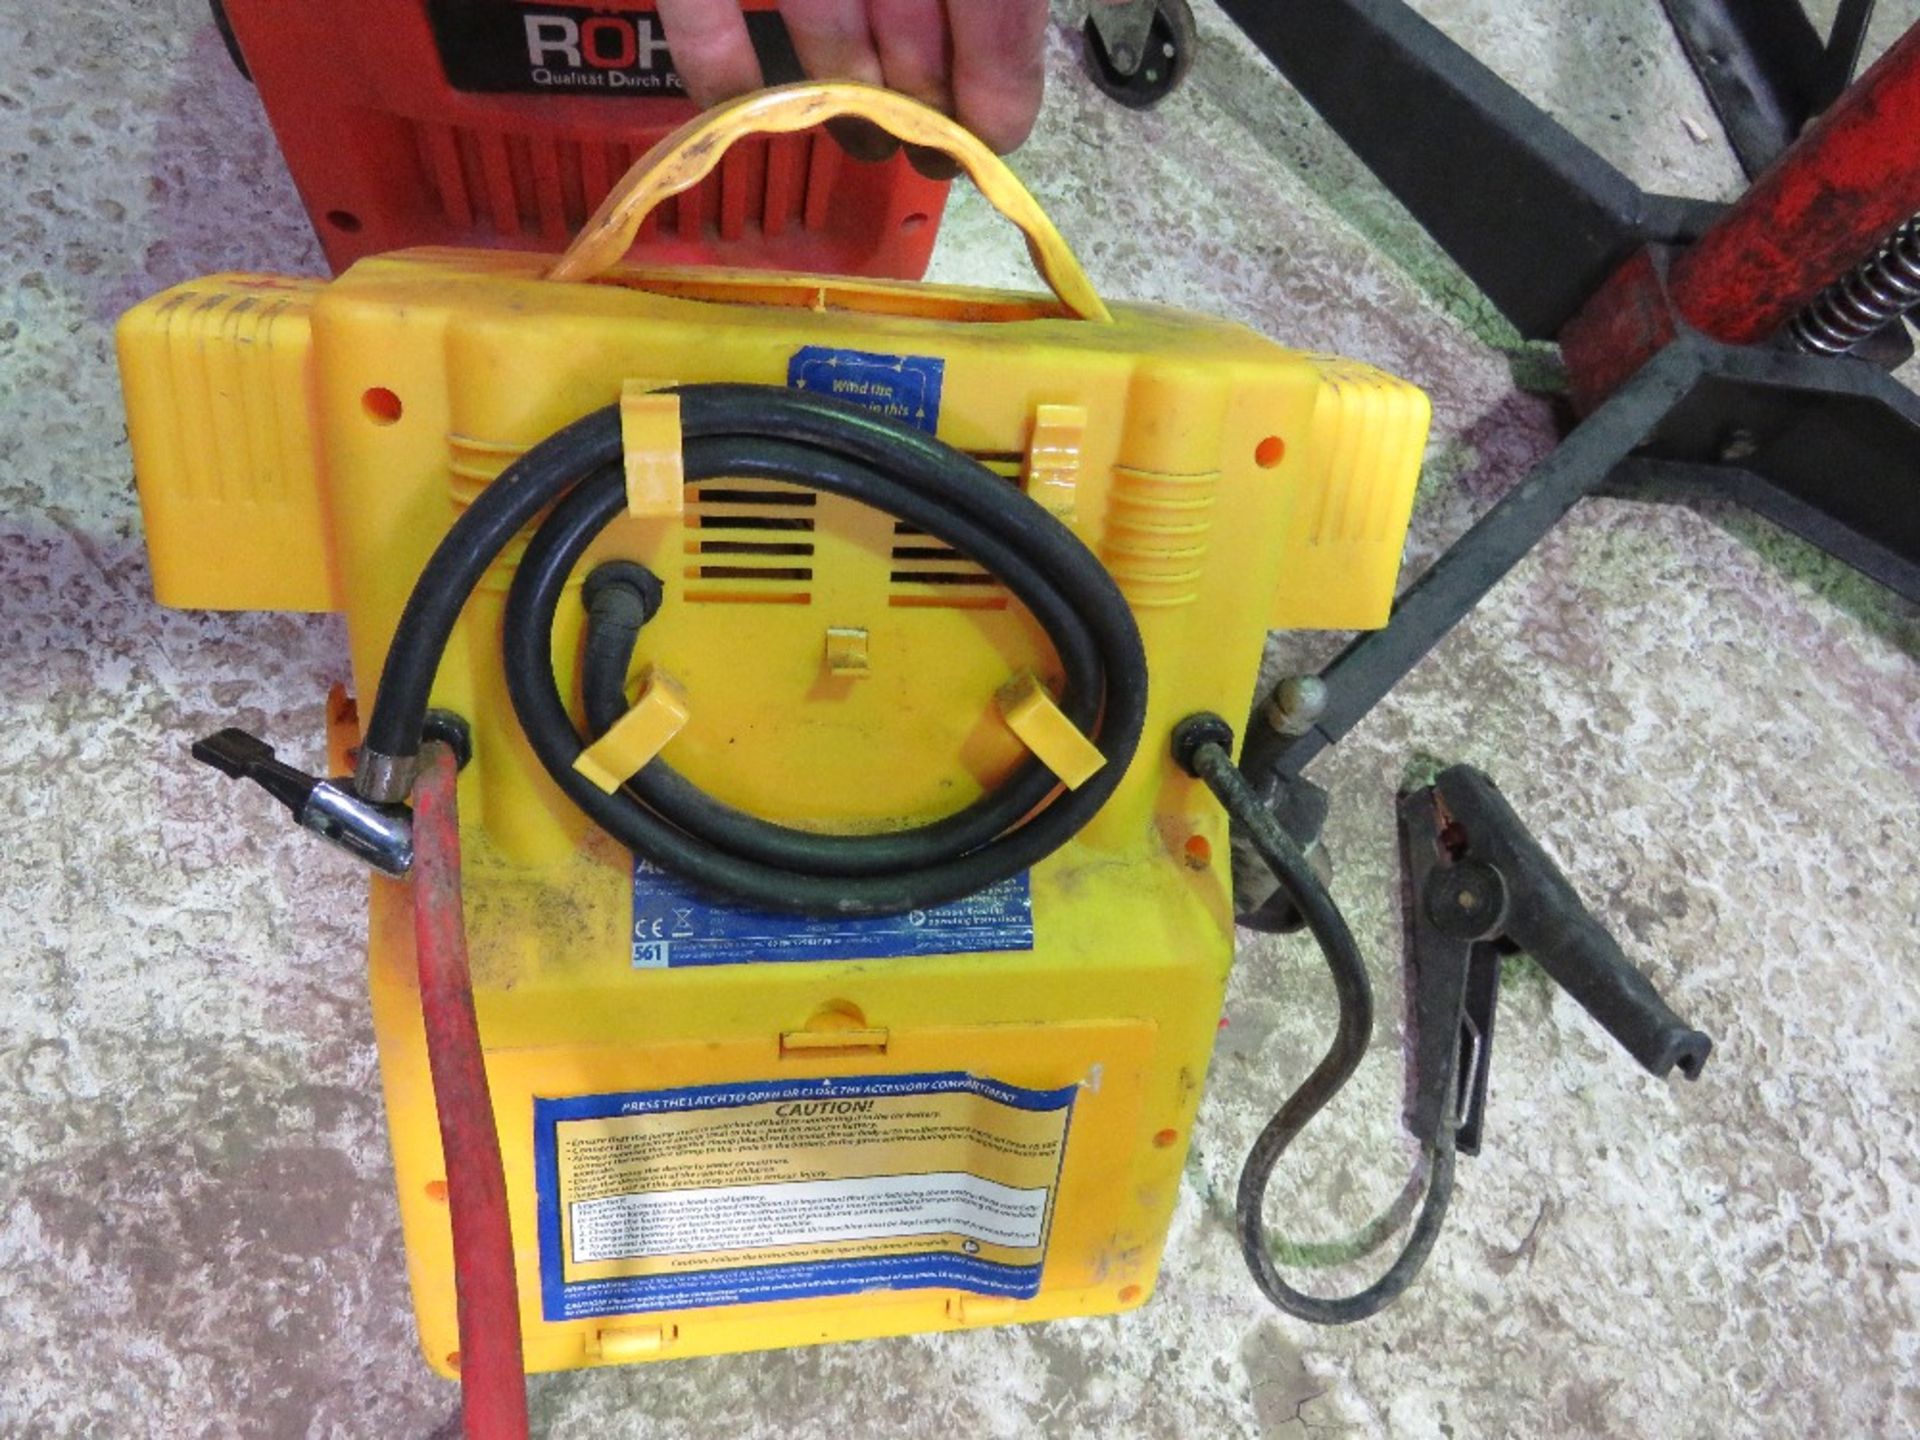 ROHR 12/24 VOLT BATTERY CHARGER PLUS A JUMP STARTER UNIT. SOURCED FROM GARAGE COMPANY LIQUIDATION. - Image 4 of 7